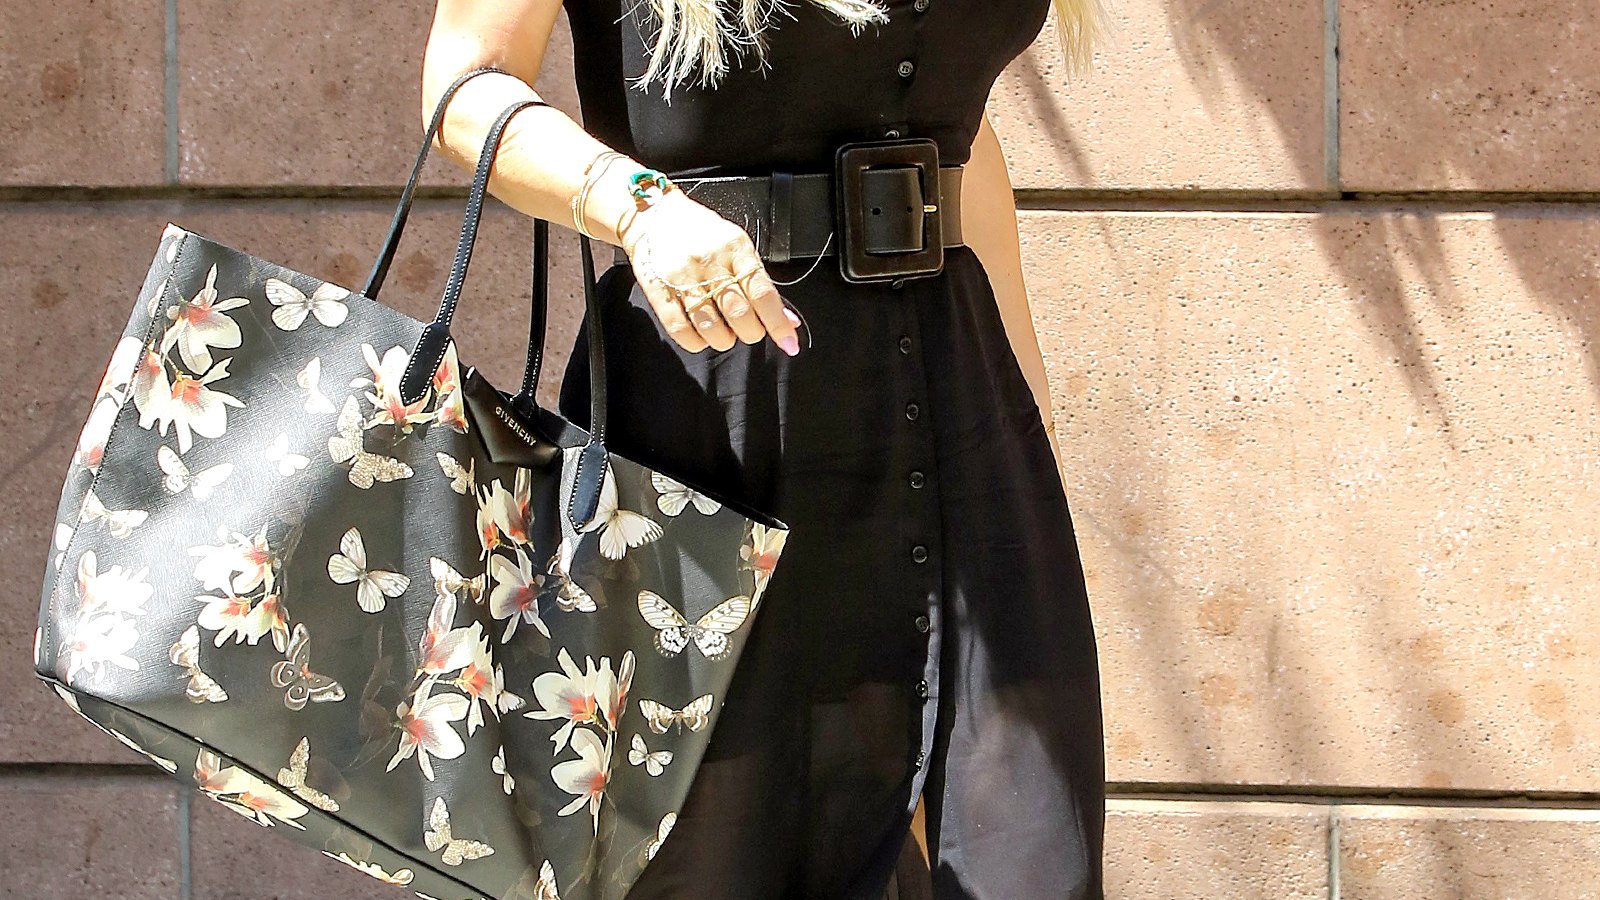 Jessica Simpson has lunch with CaCe Cobb at Via Alloro on Aug. 28.